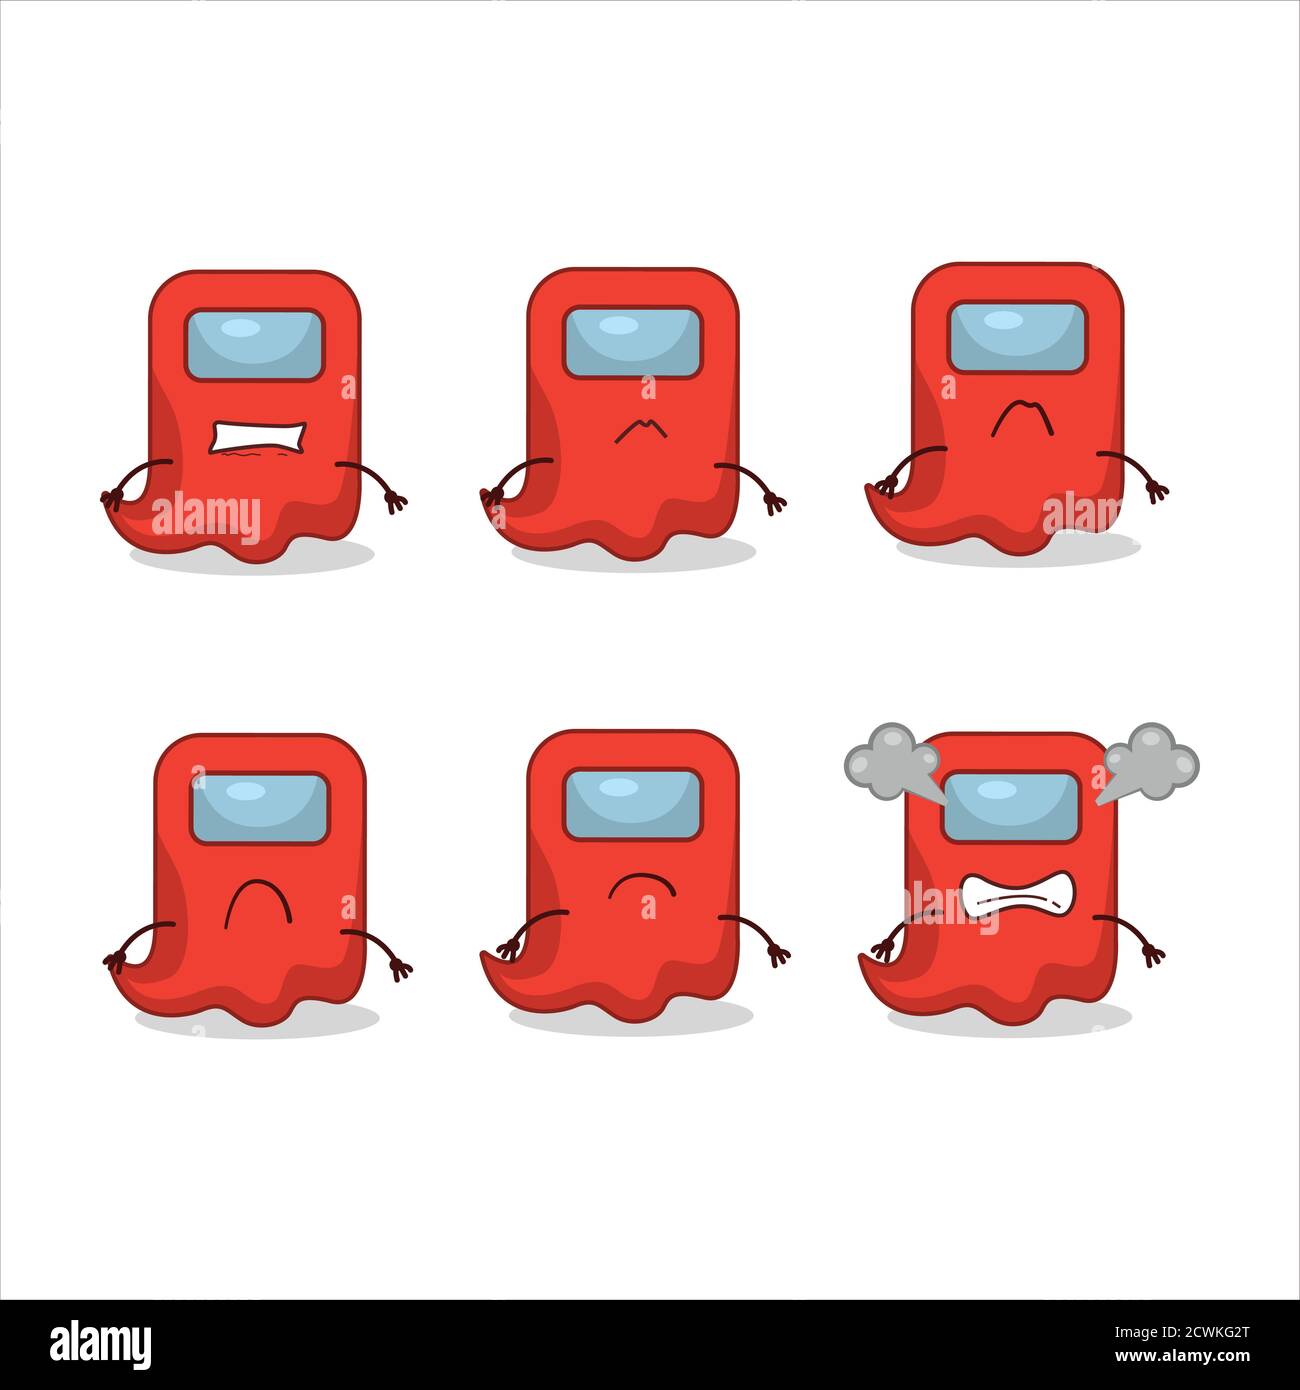 Ghost among us red cartoon character with various angry expressions Stock Vector